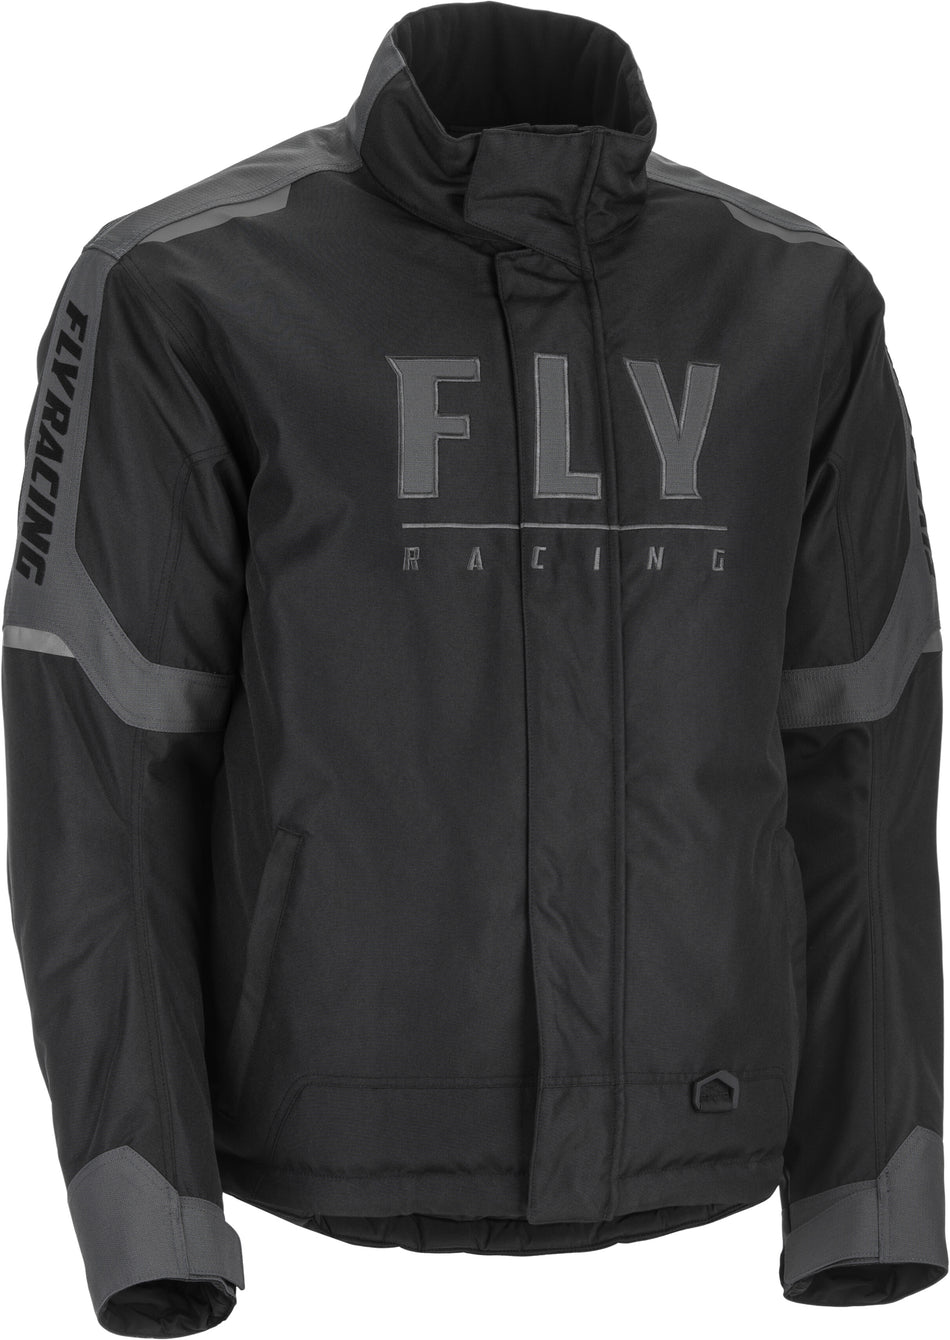 FLY RACING Outpost Jacket Black/Grey Sm 470-4140S